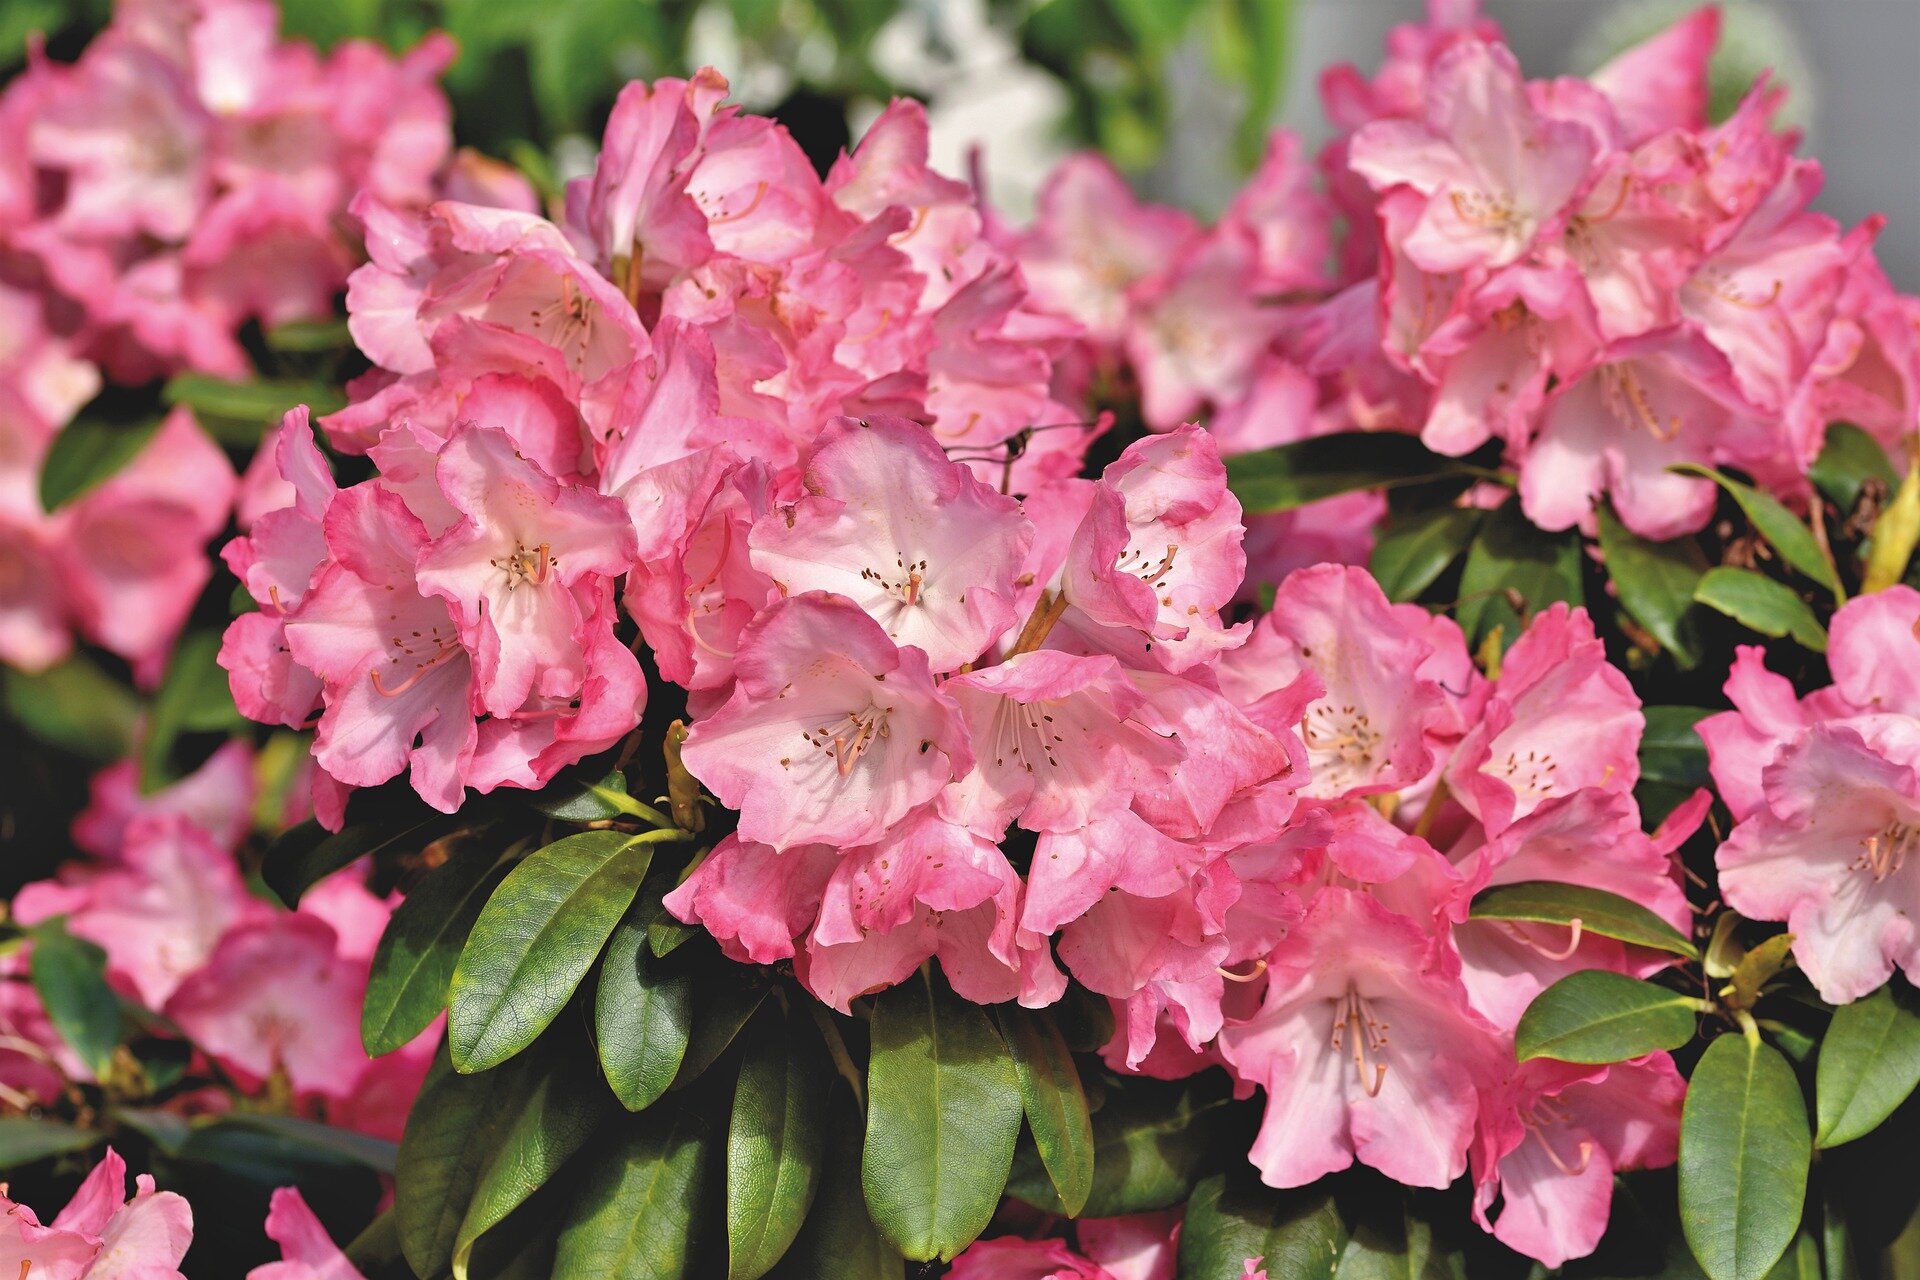 Are Rhododendrons Toxic? — My Dog Ate